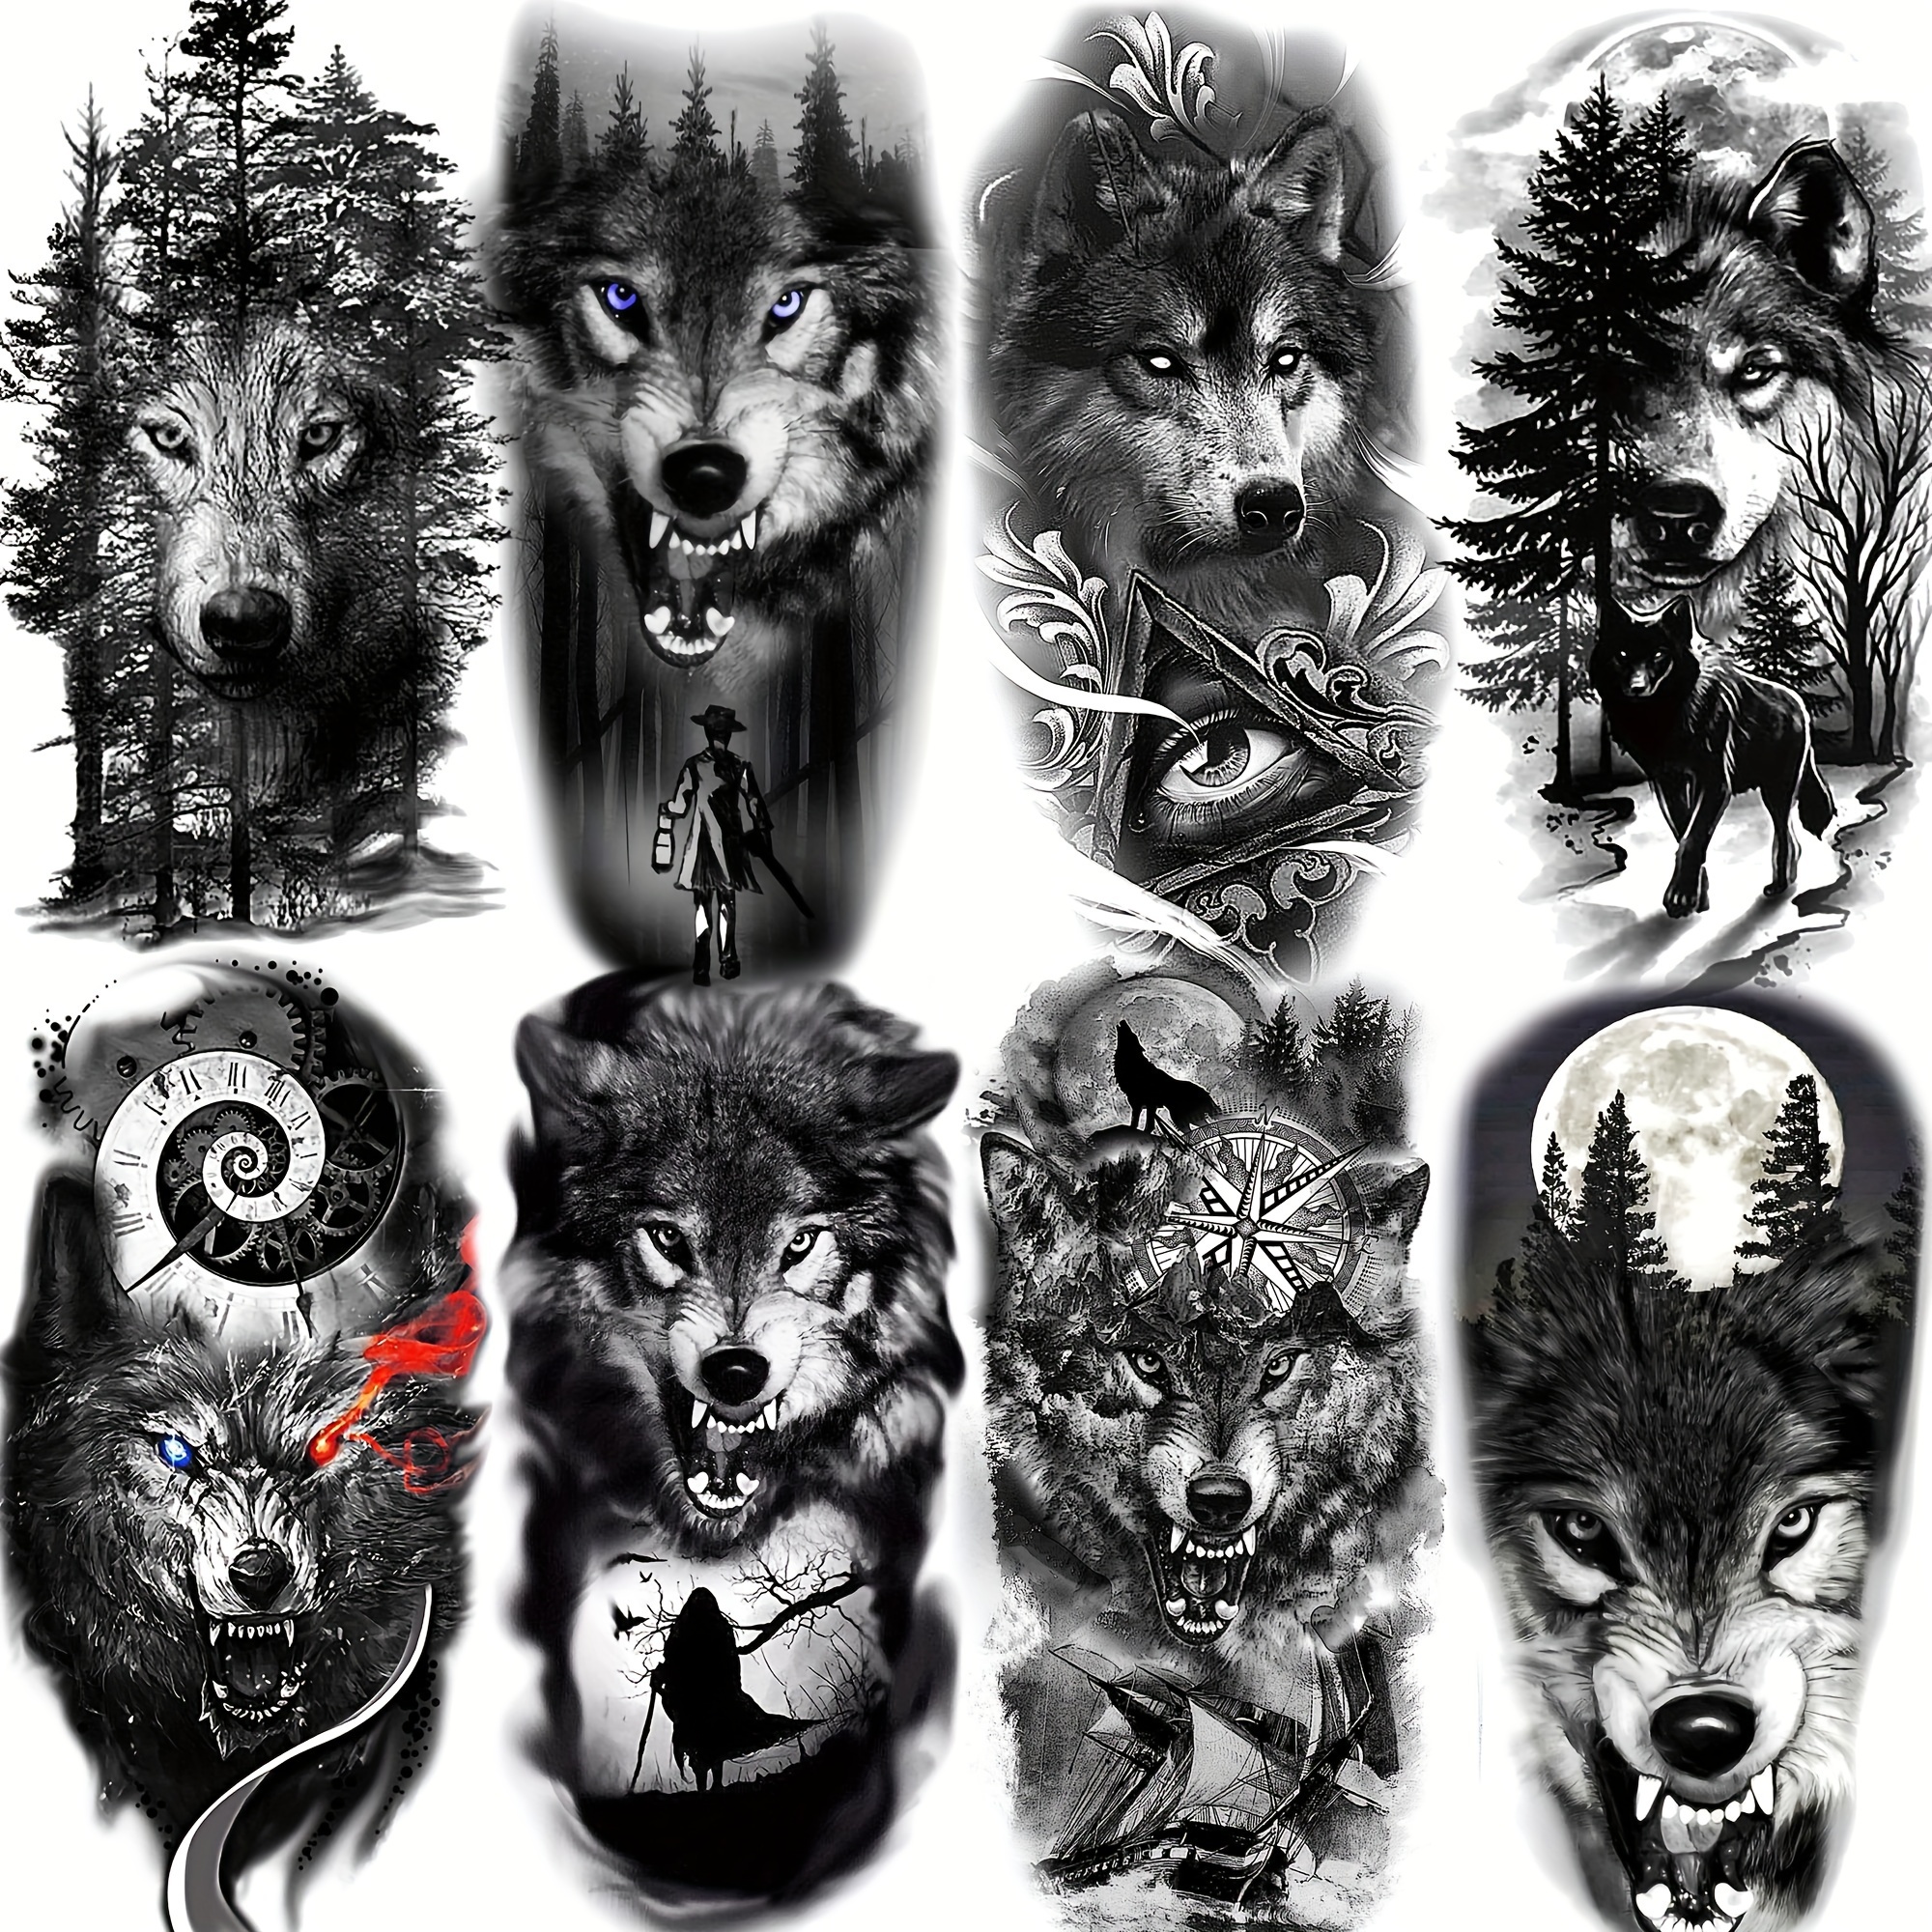 

8 Sheets Realistic Wolf Temporary Tattoos For Women Arm Legs Men Adults Legs, Tribal Black Coyotes Tattoo Stickers, Fake Waterproof Forest Wolf Tattoo Paste Paper